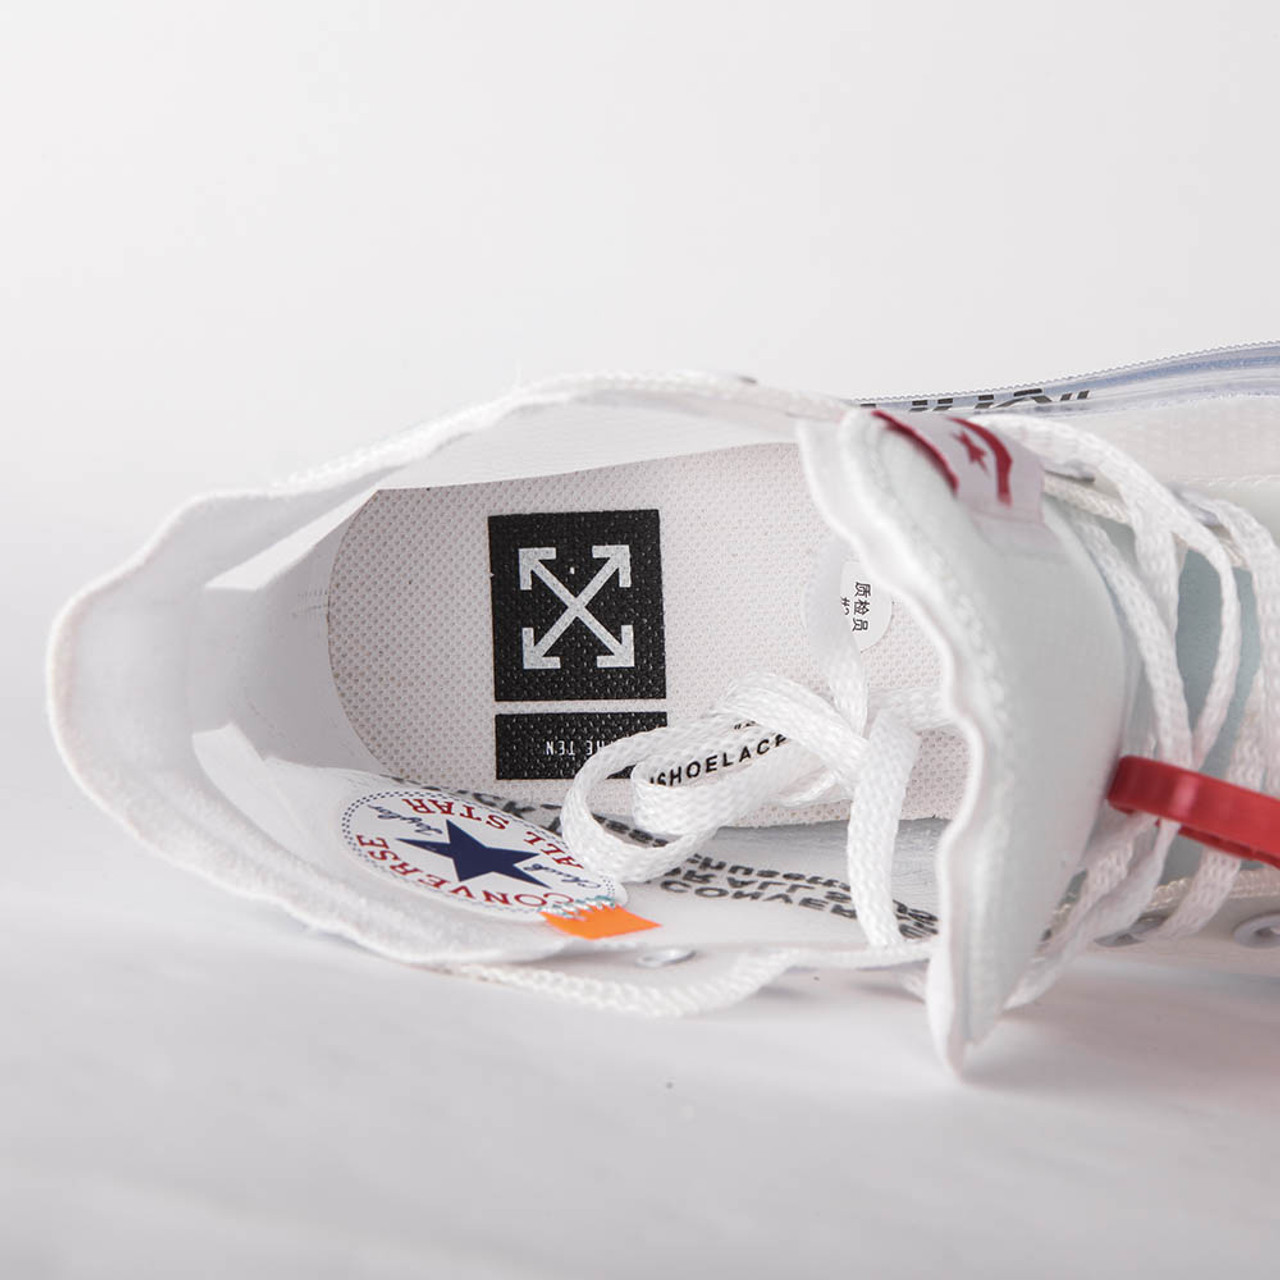 where to buy best stockX UA High quality replica off-white x nike converse chuck taylor vulcanize all see through olorway sneakers Hypedripz the best high quality trusted replica